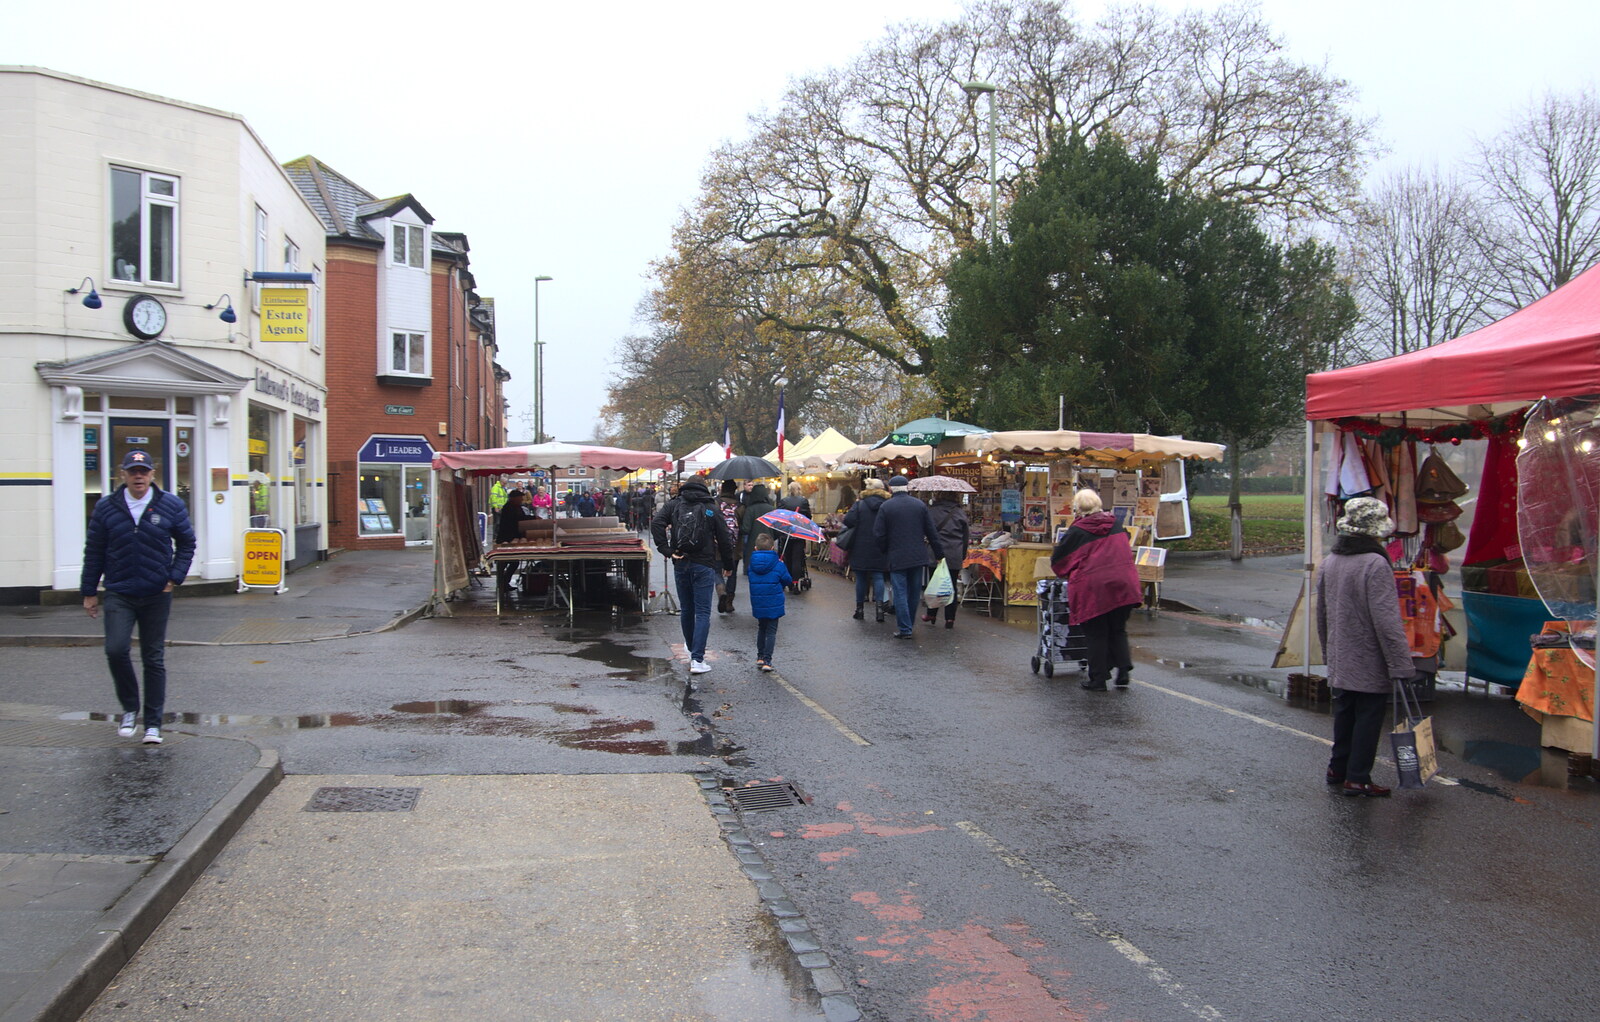 Looking back up Ashley Road from A Christmas Market, New Milton, Hampshire - 24th November 2018